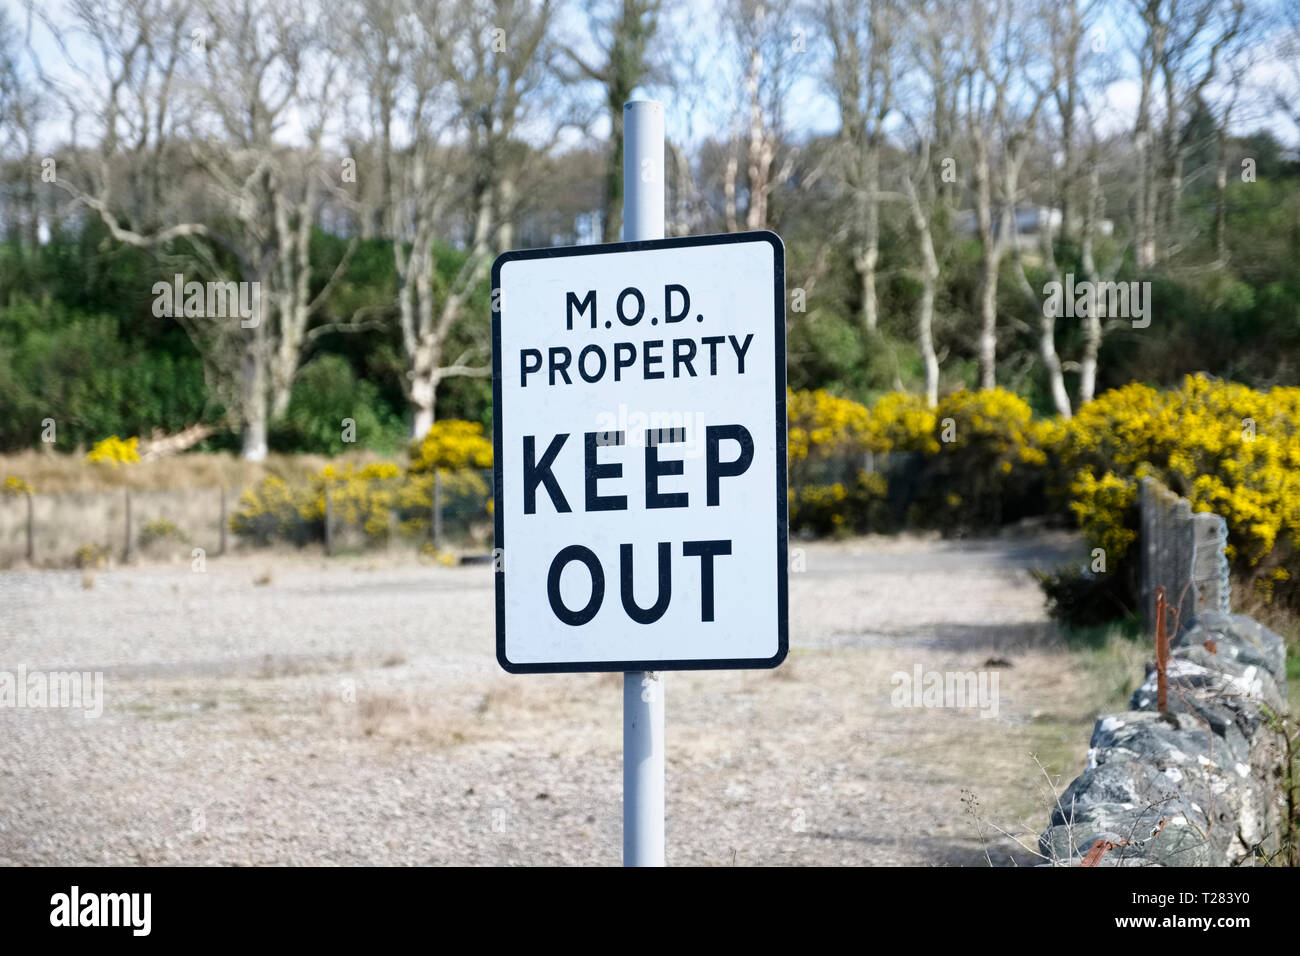 MOD property keep out sign security and protection ministry of defence navy army government base uk Stock Photo